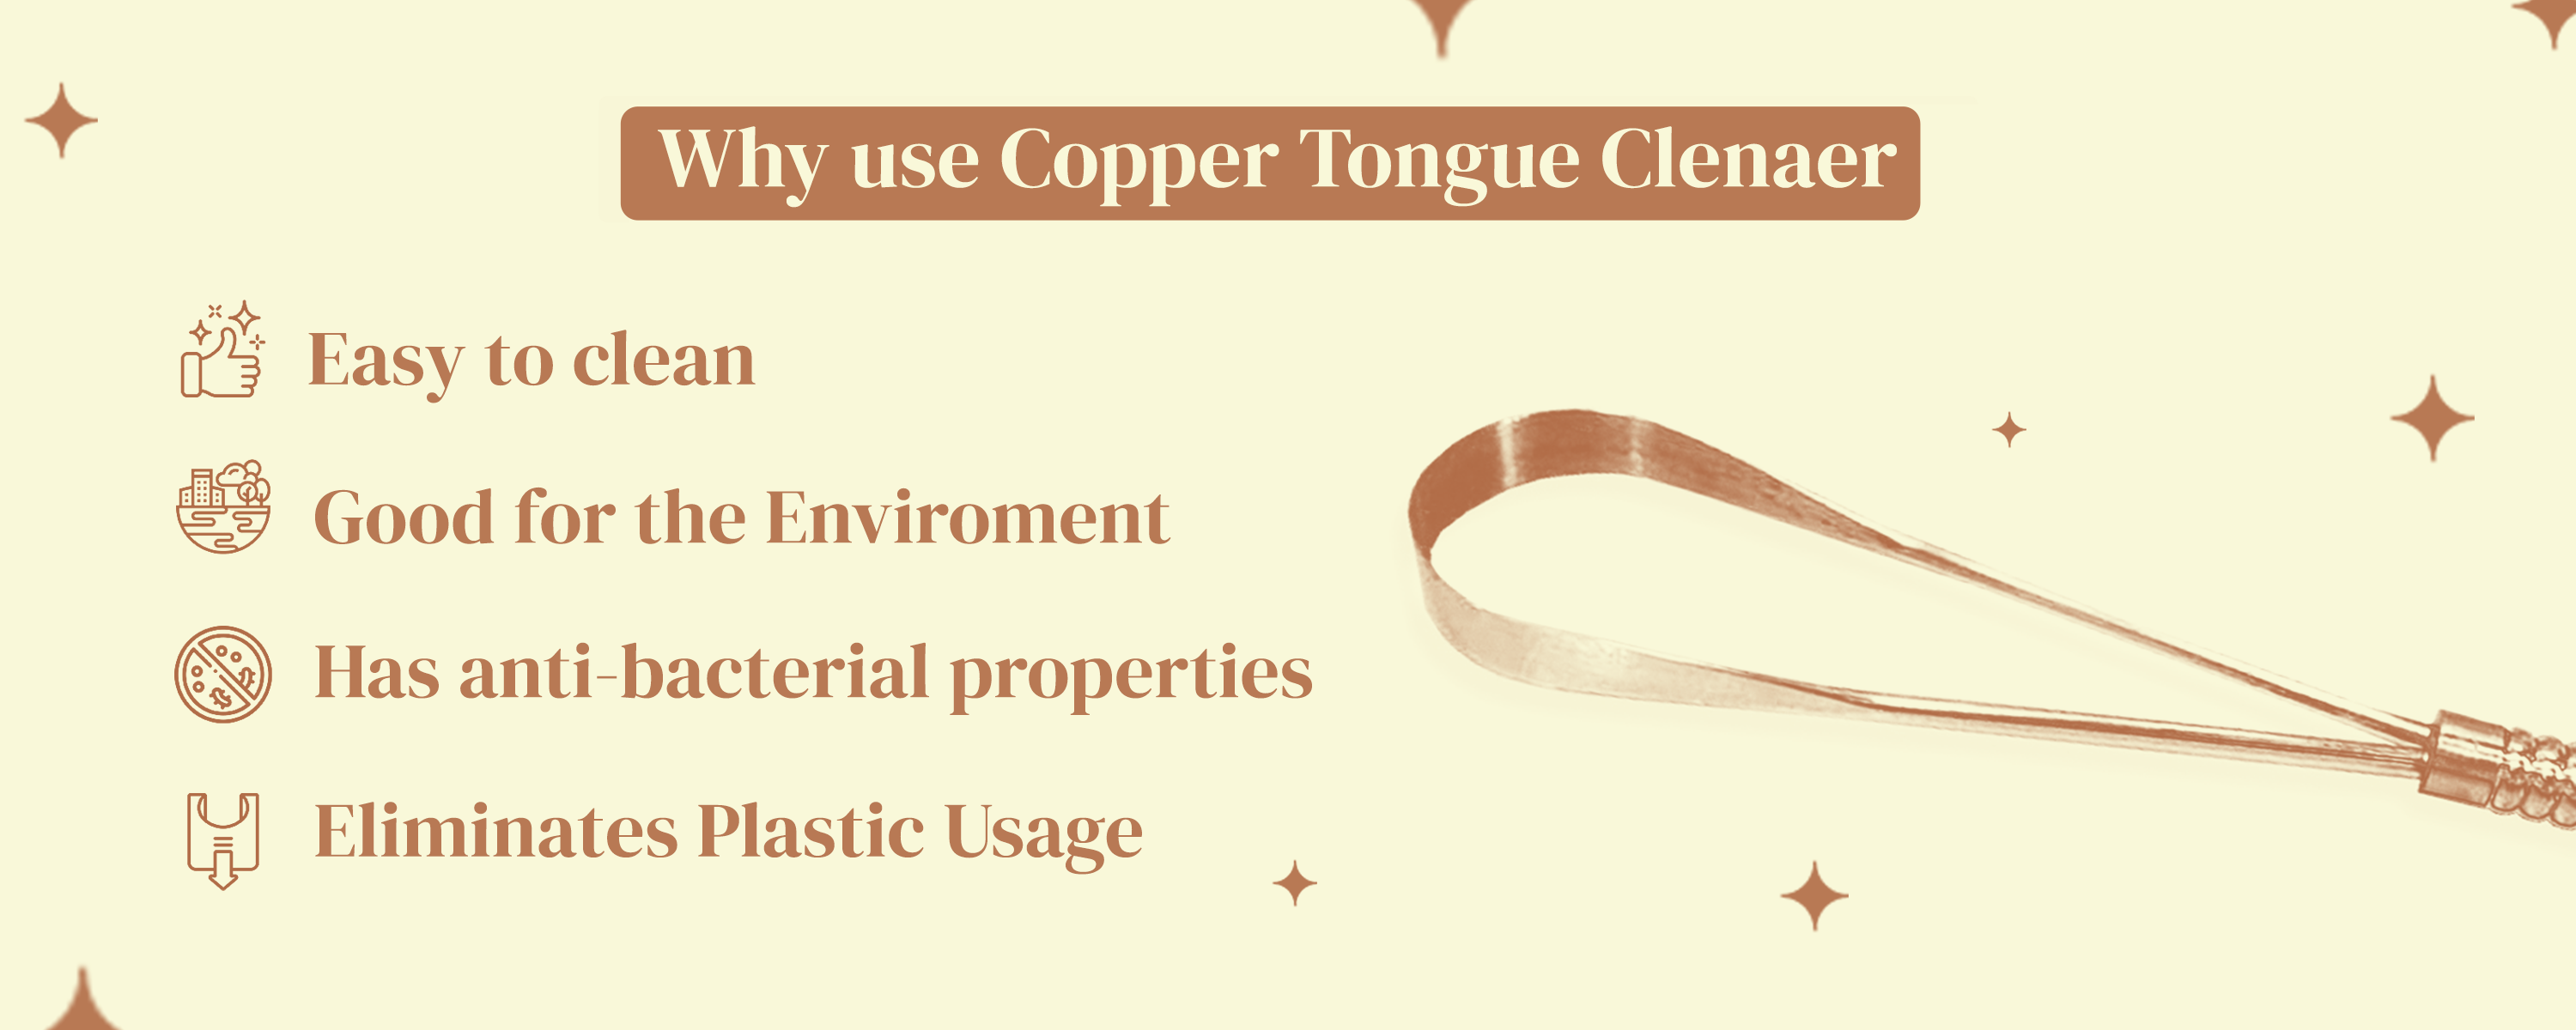 Buy Perfora Copper Tongue Cleaner Online at Best Price in India – Perfora -  Elevating Everyday Oral Care